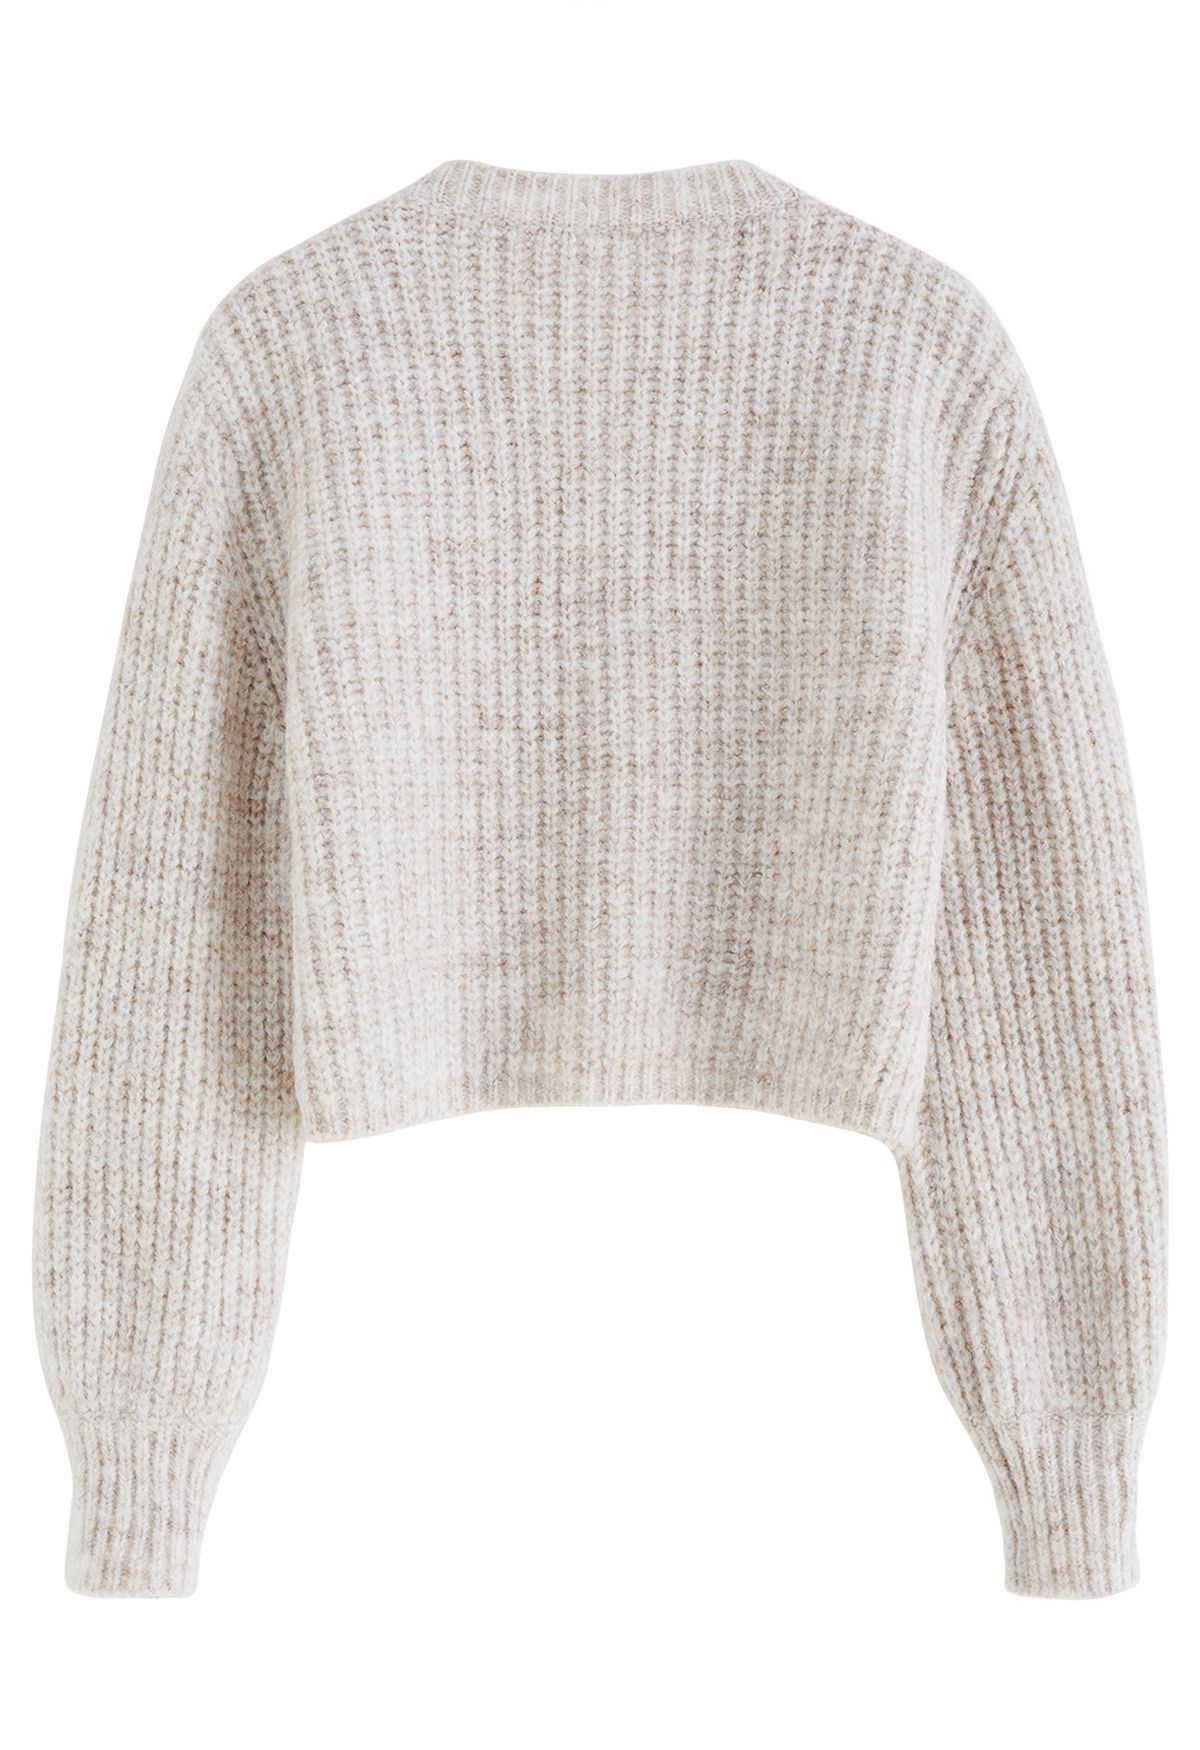 Round Neck Crop Knit Sweater in Oatmeal